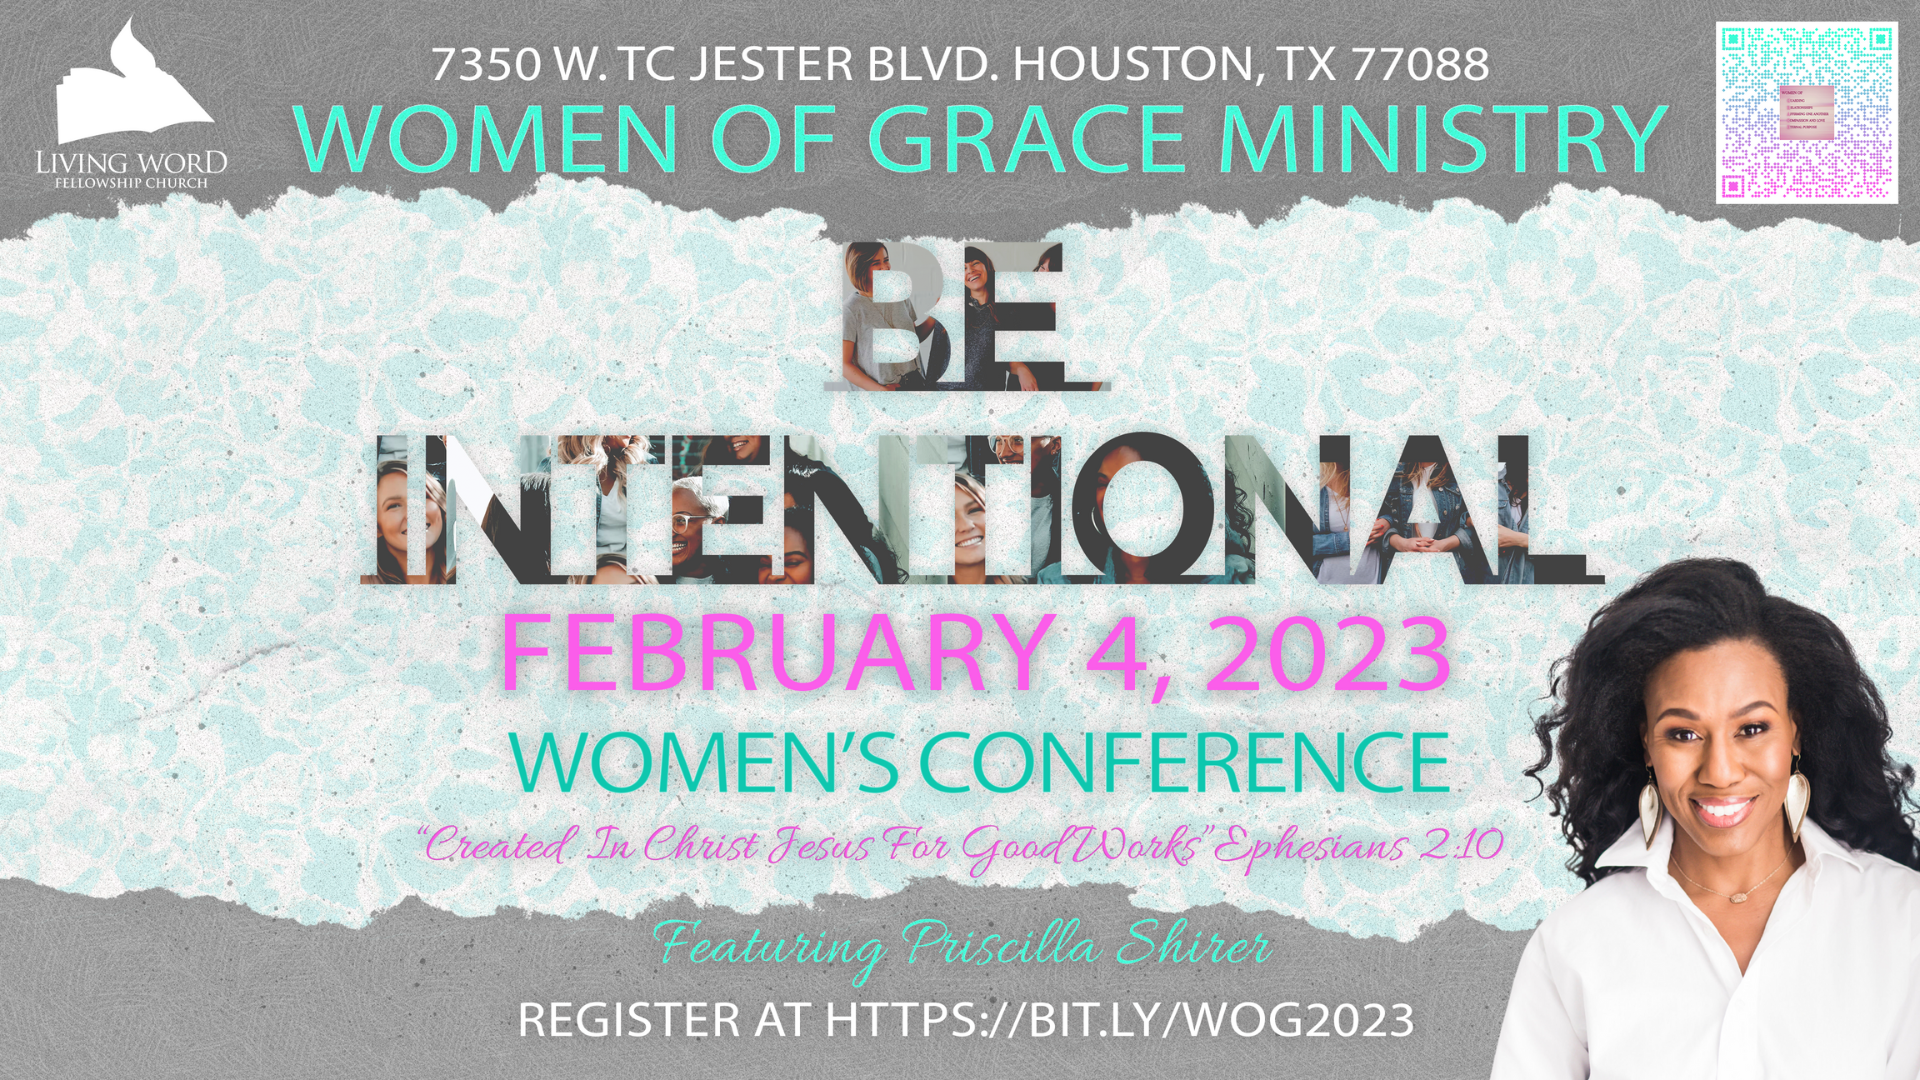 Women of Grace Ministry Conference head image